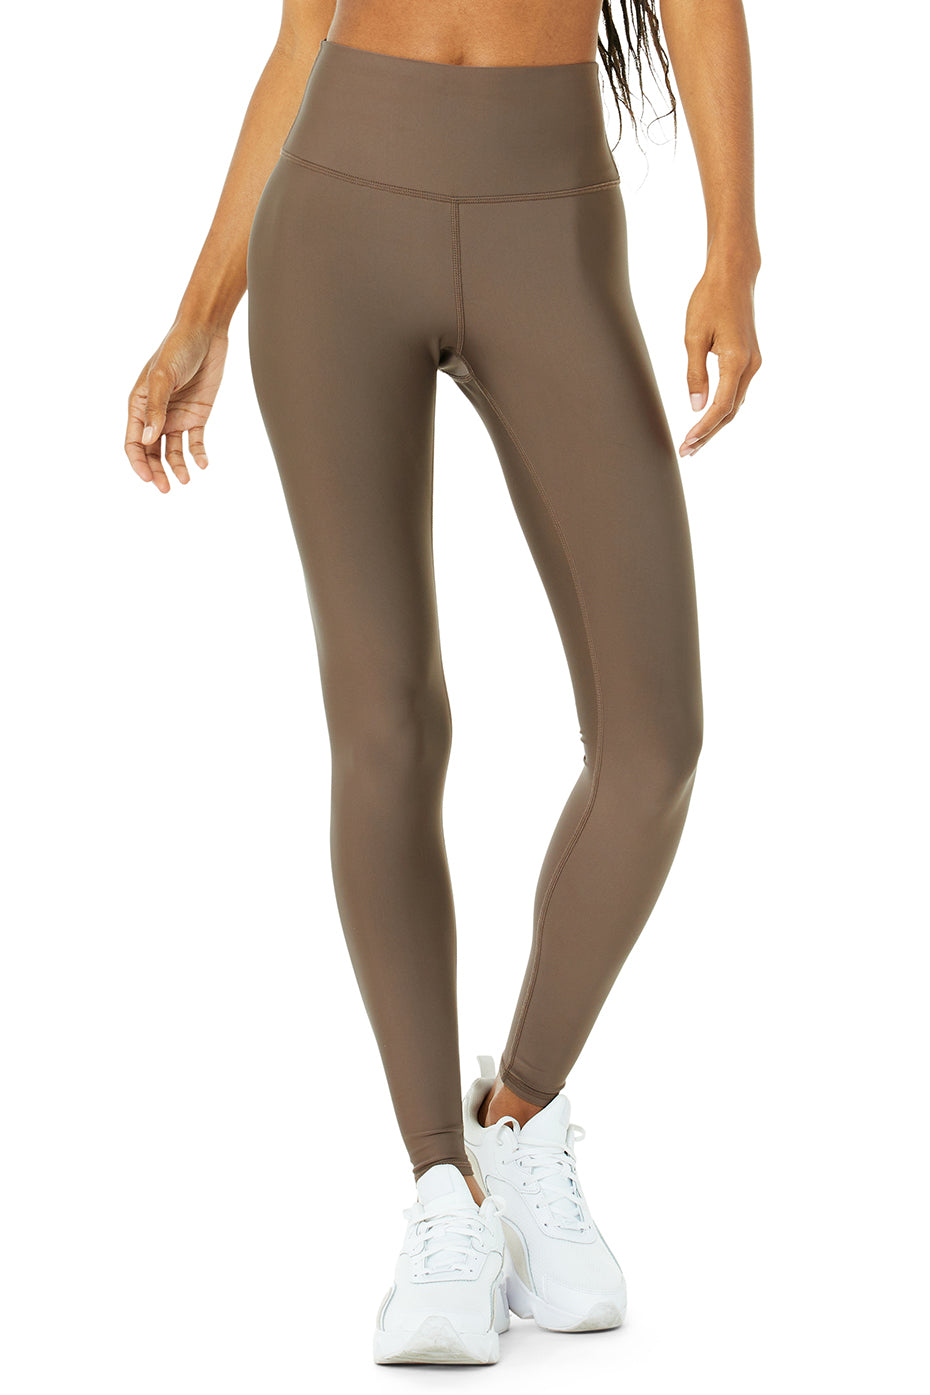 High-Waist Airlift Legging in Hot Cocoa by Alo Yoga | Ballet for Women